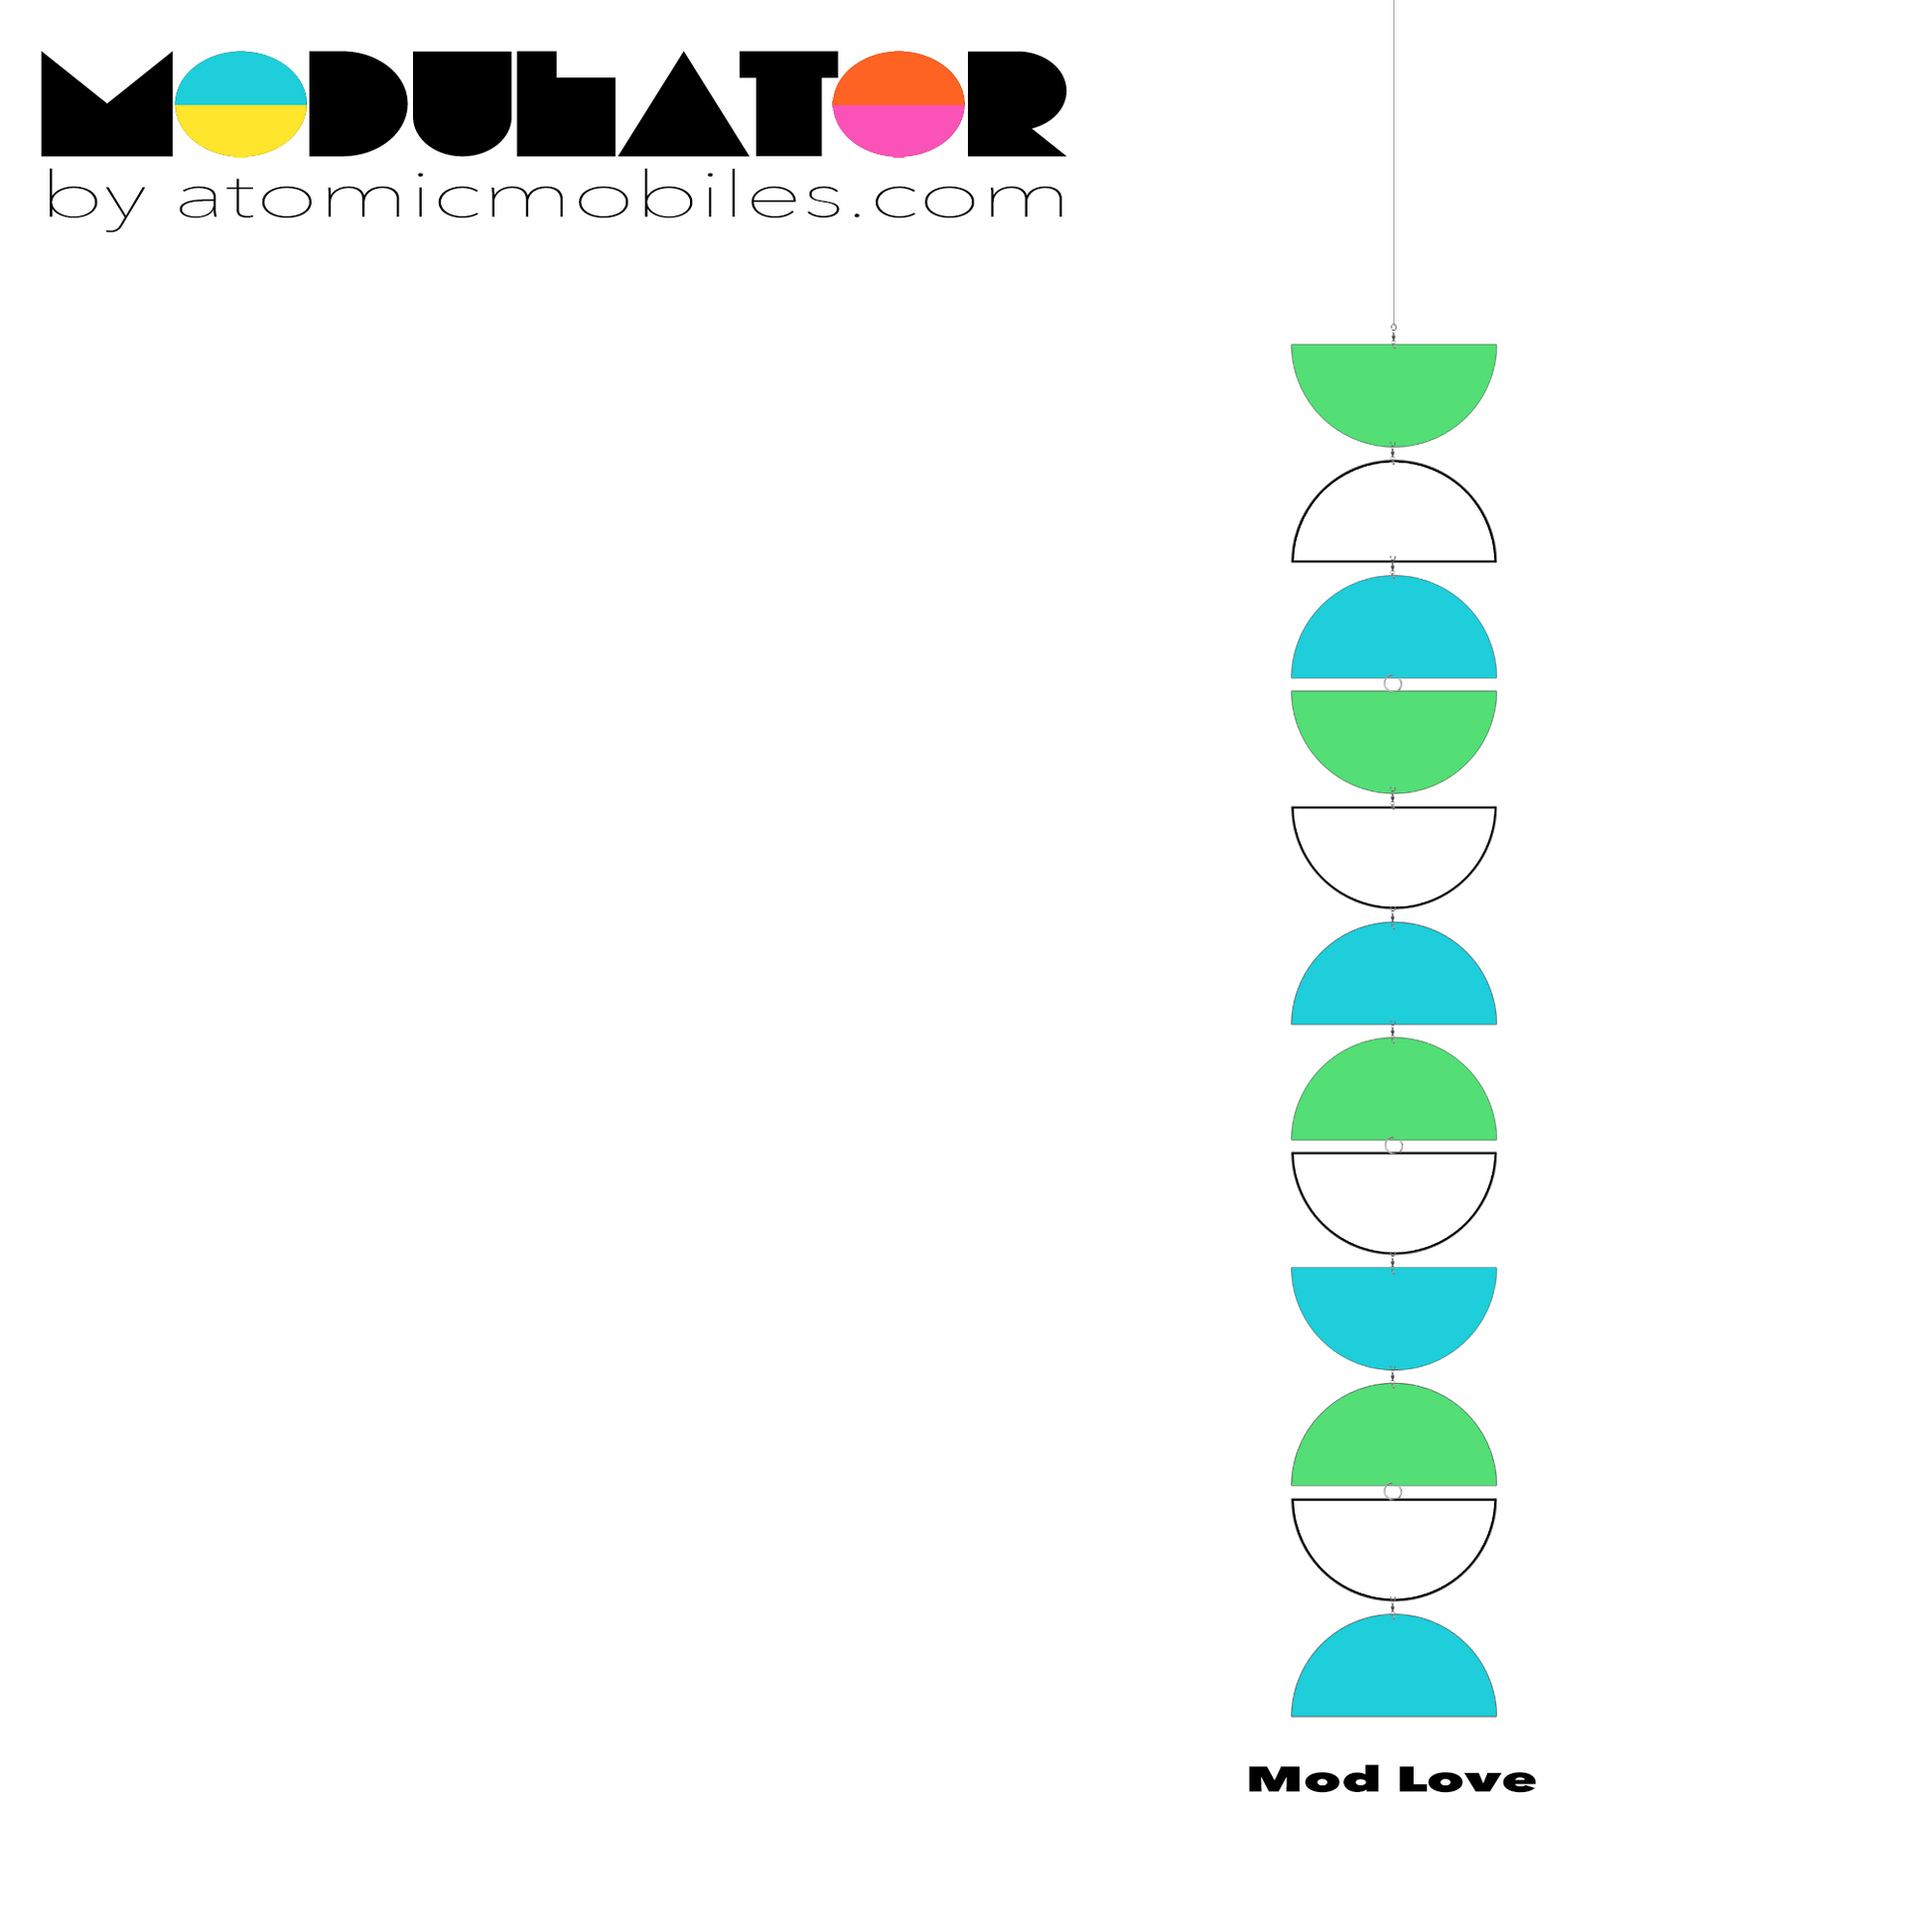 MODulator Vertical Art Mobile - retro mid century modern style hanging art mobile in Mod Love colors of Lime, Aqua and White  by AtomicMobiles.com